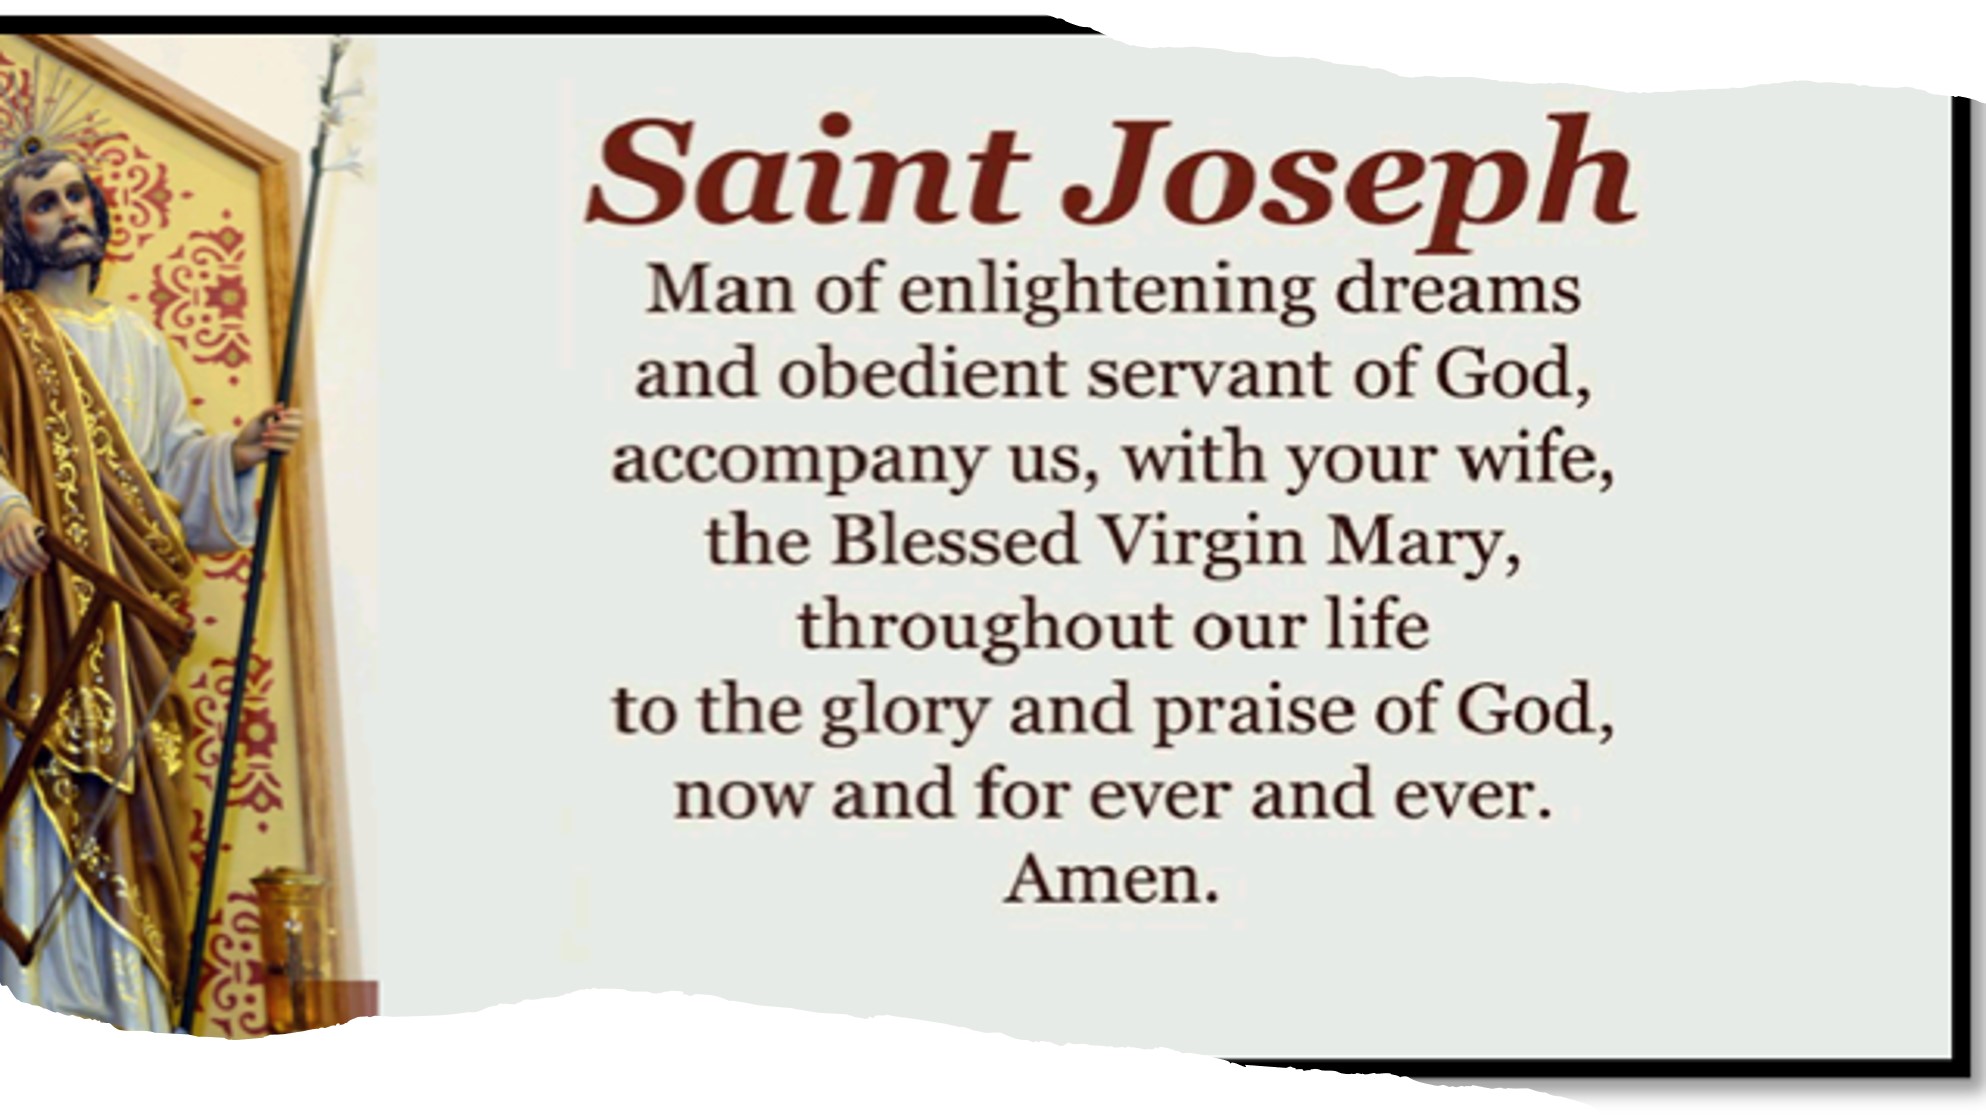 St. Joseph Feast Day Friday March 19, 2021